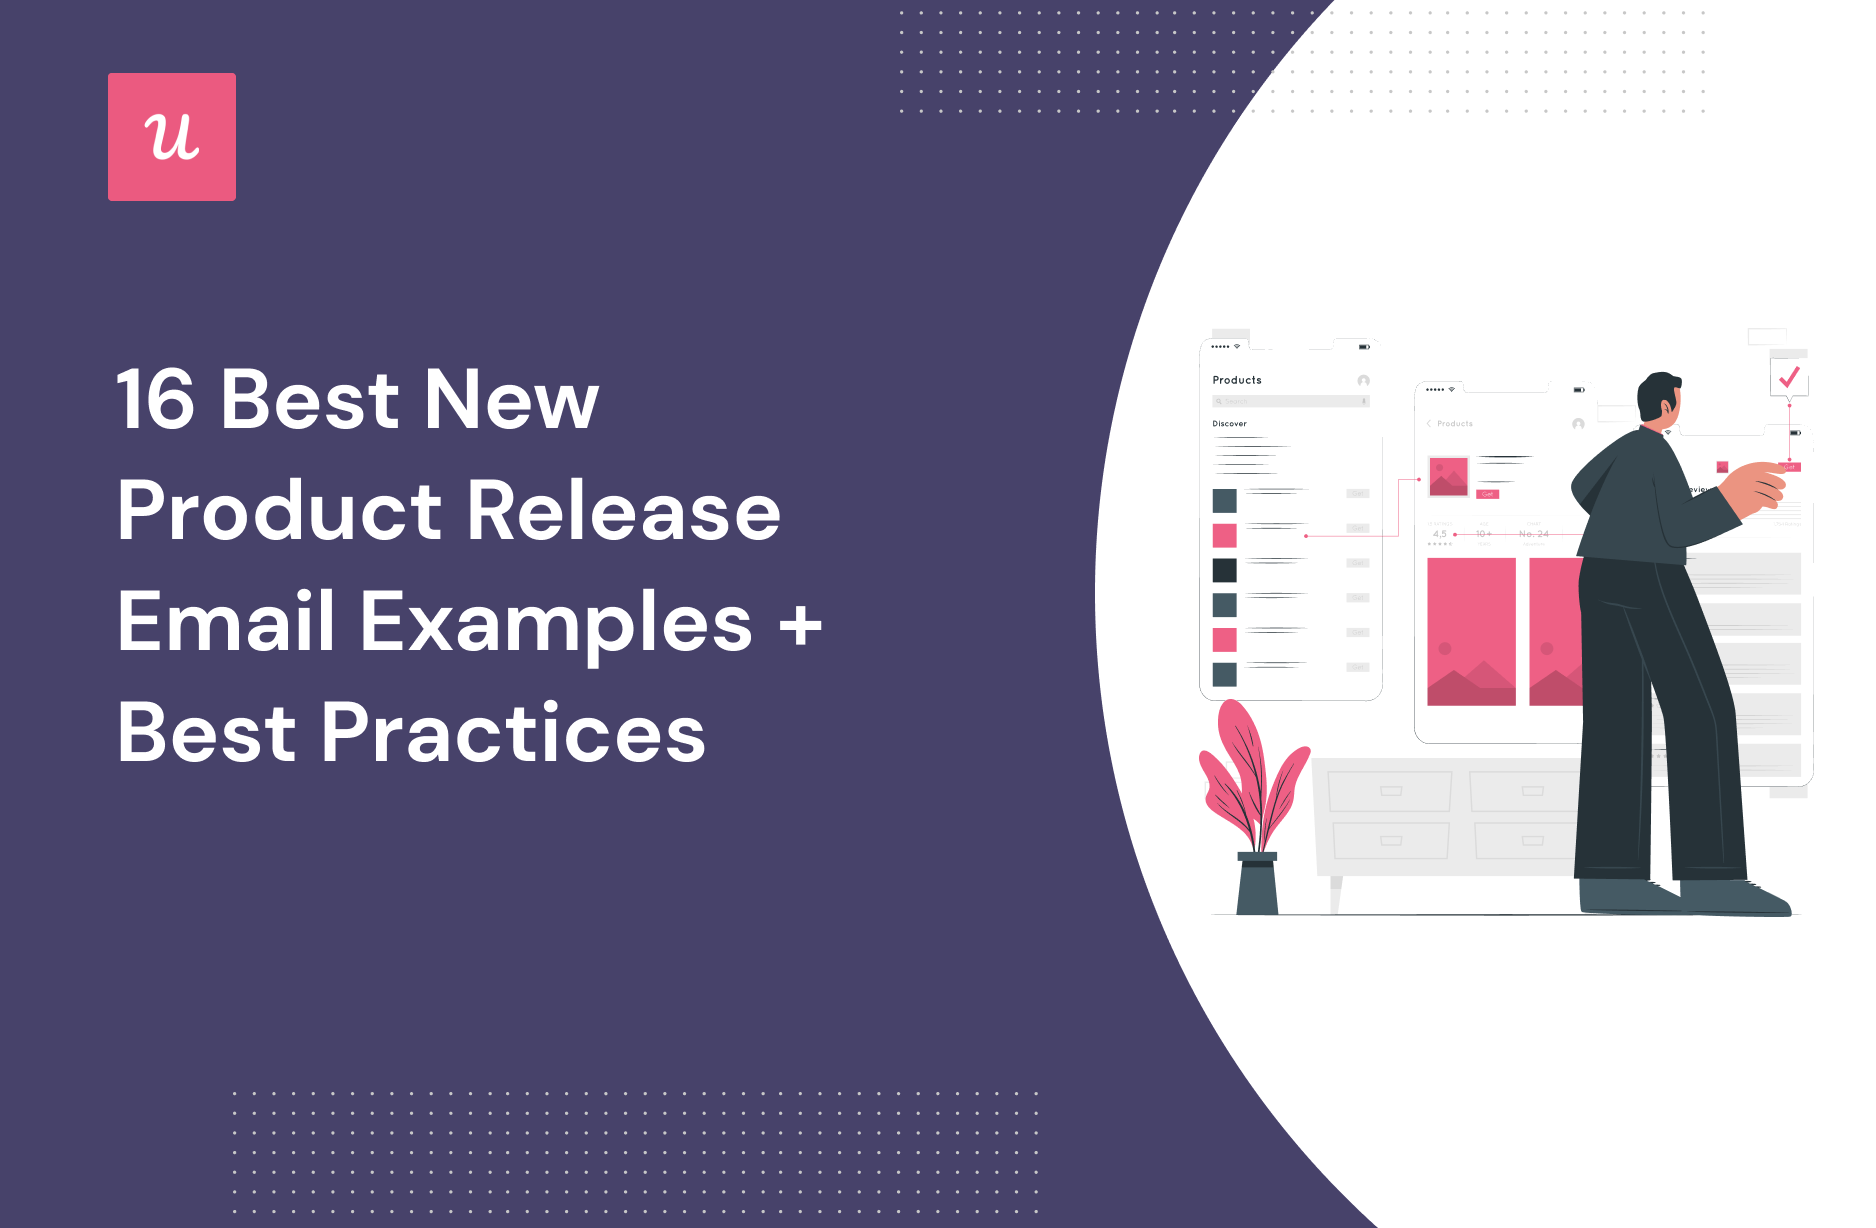 16-Best-New-Product-Release-Email-Examples-Best-Practices